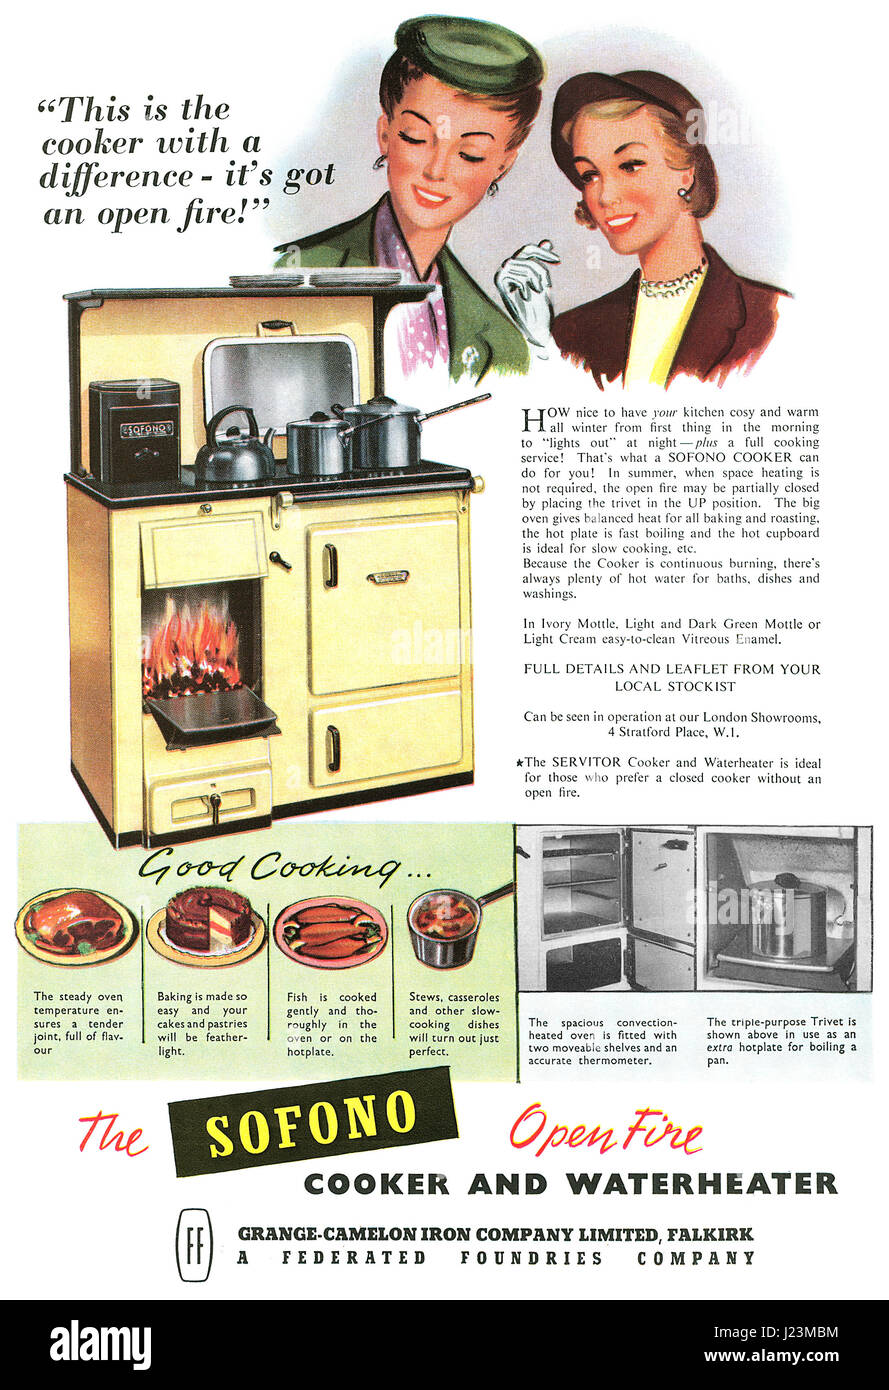 1956 British advertisement for Sofono Cookers by the Grange-Camelon Iron Company of Falkirk. Stock Photo